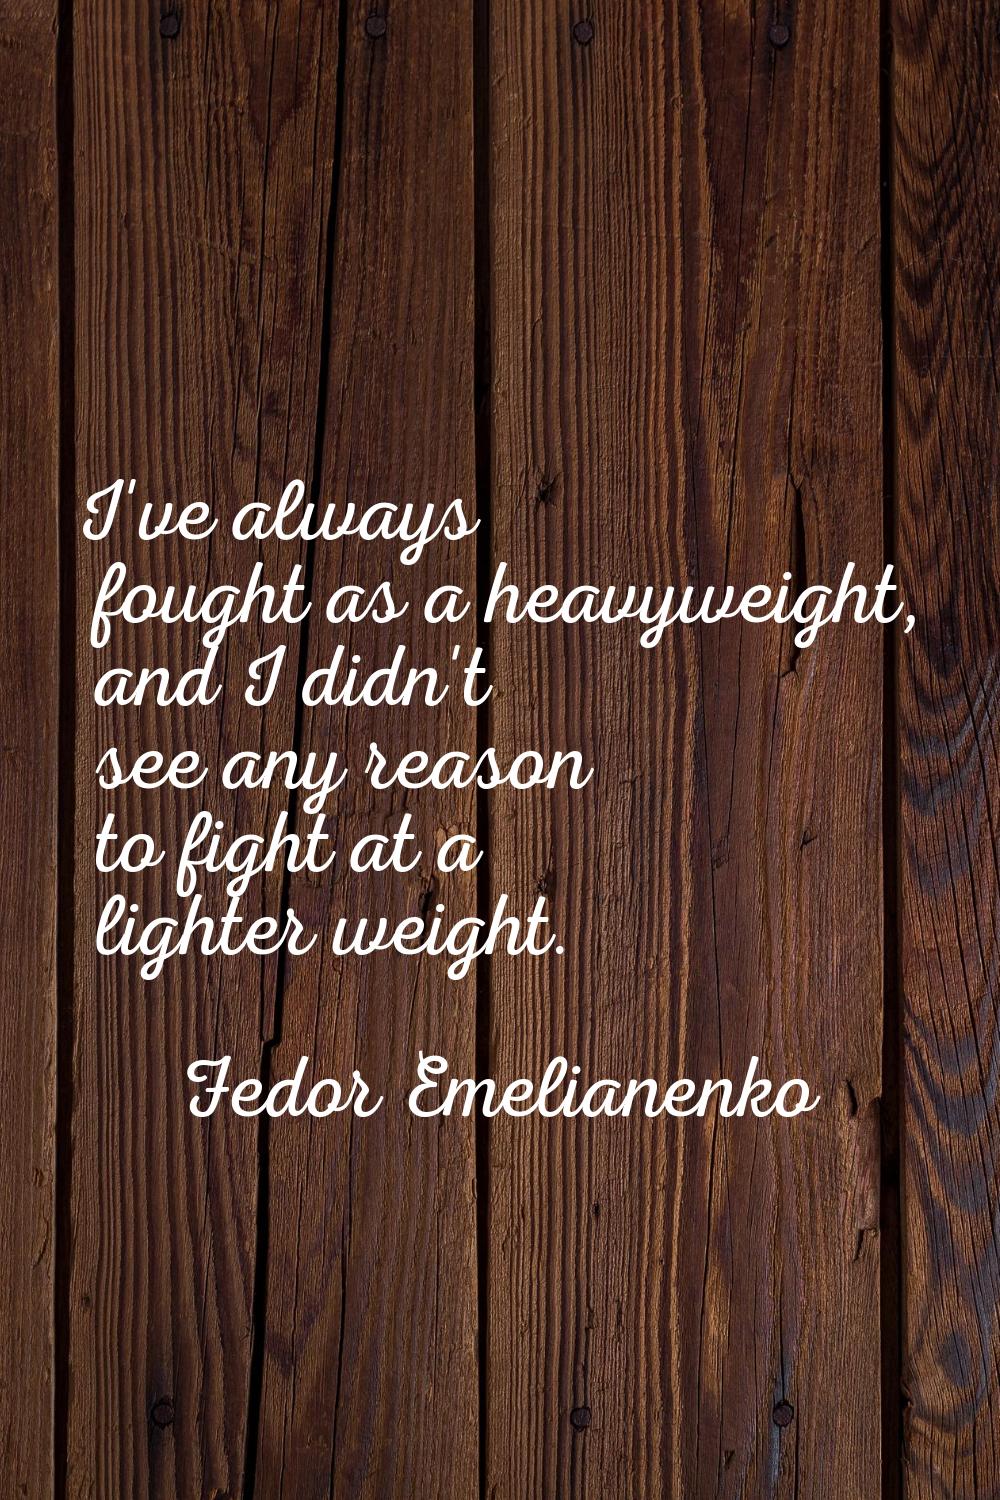 I've always fought as a heavyweight, and I didn't see any reason to fight at a lighter weight.